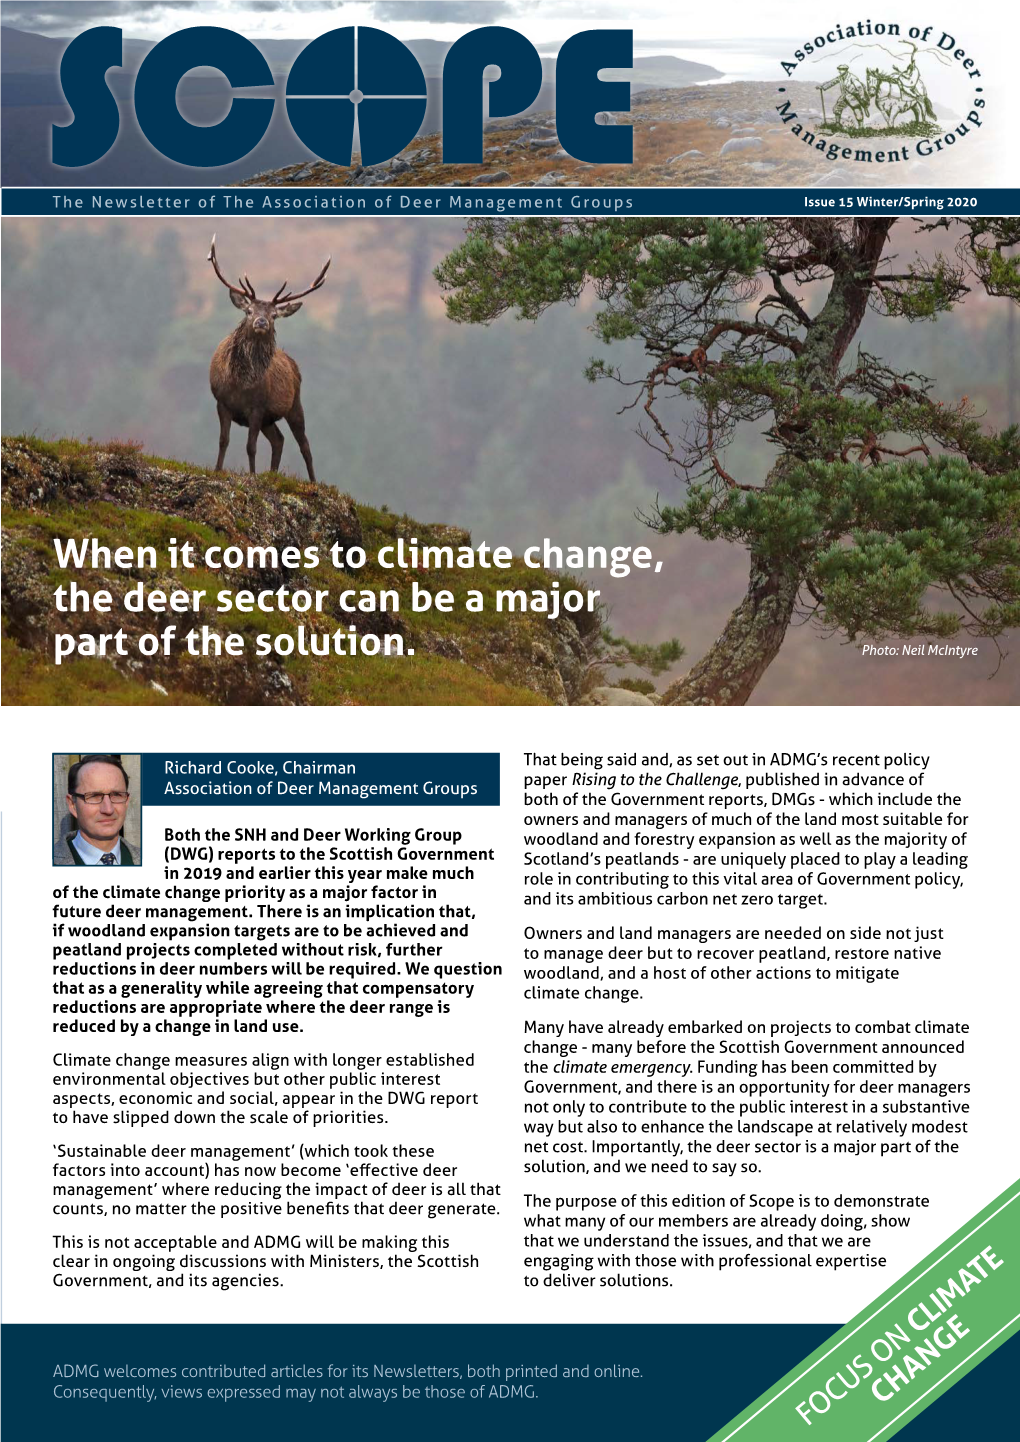 When It Comes to Climate Change, the Deer Sector Can Be a Major Part of the Solution